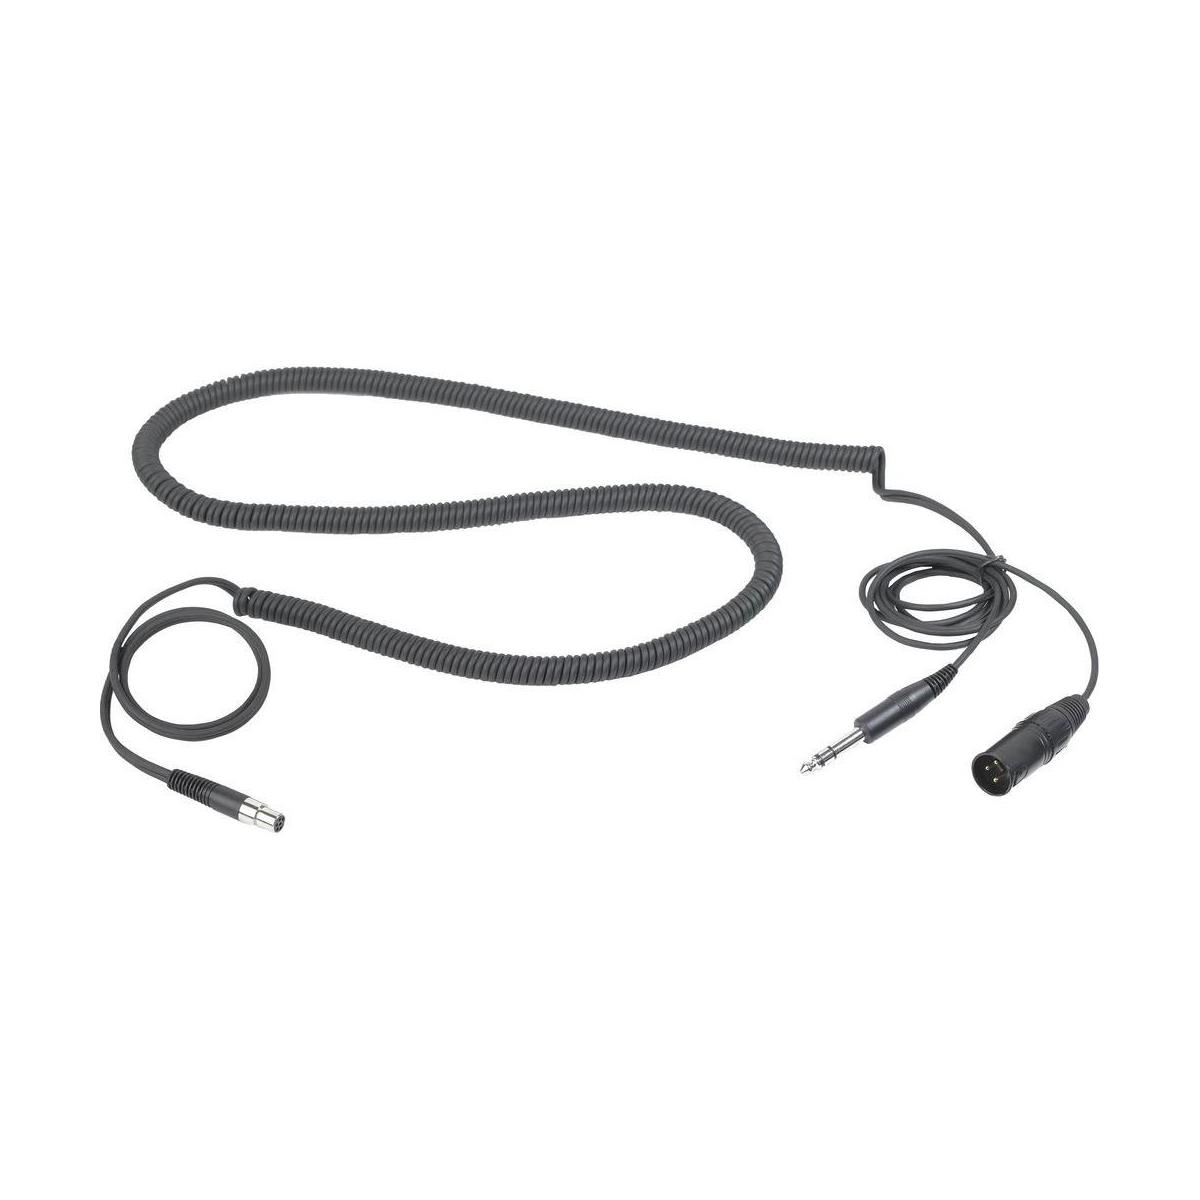 Image of AKG MK HS Studio D Headset Cable for Moderators